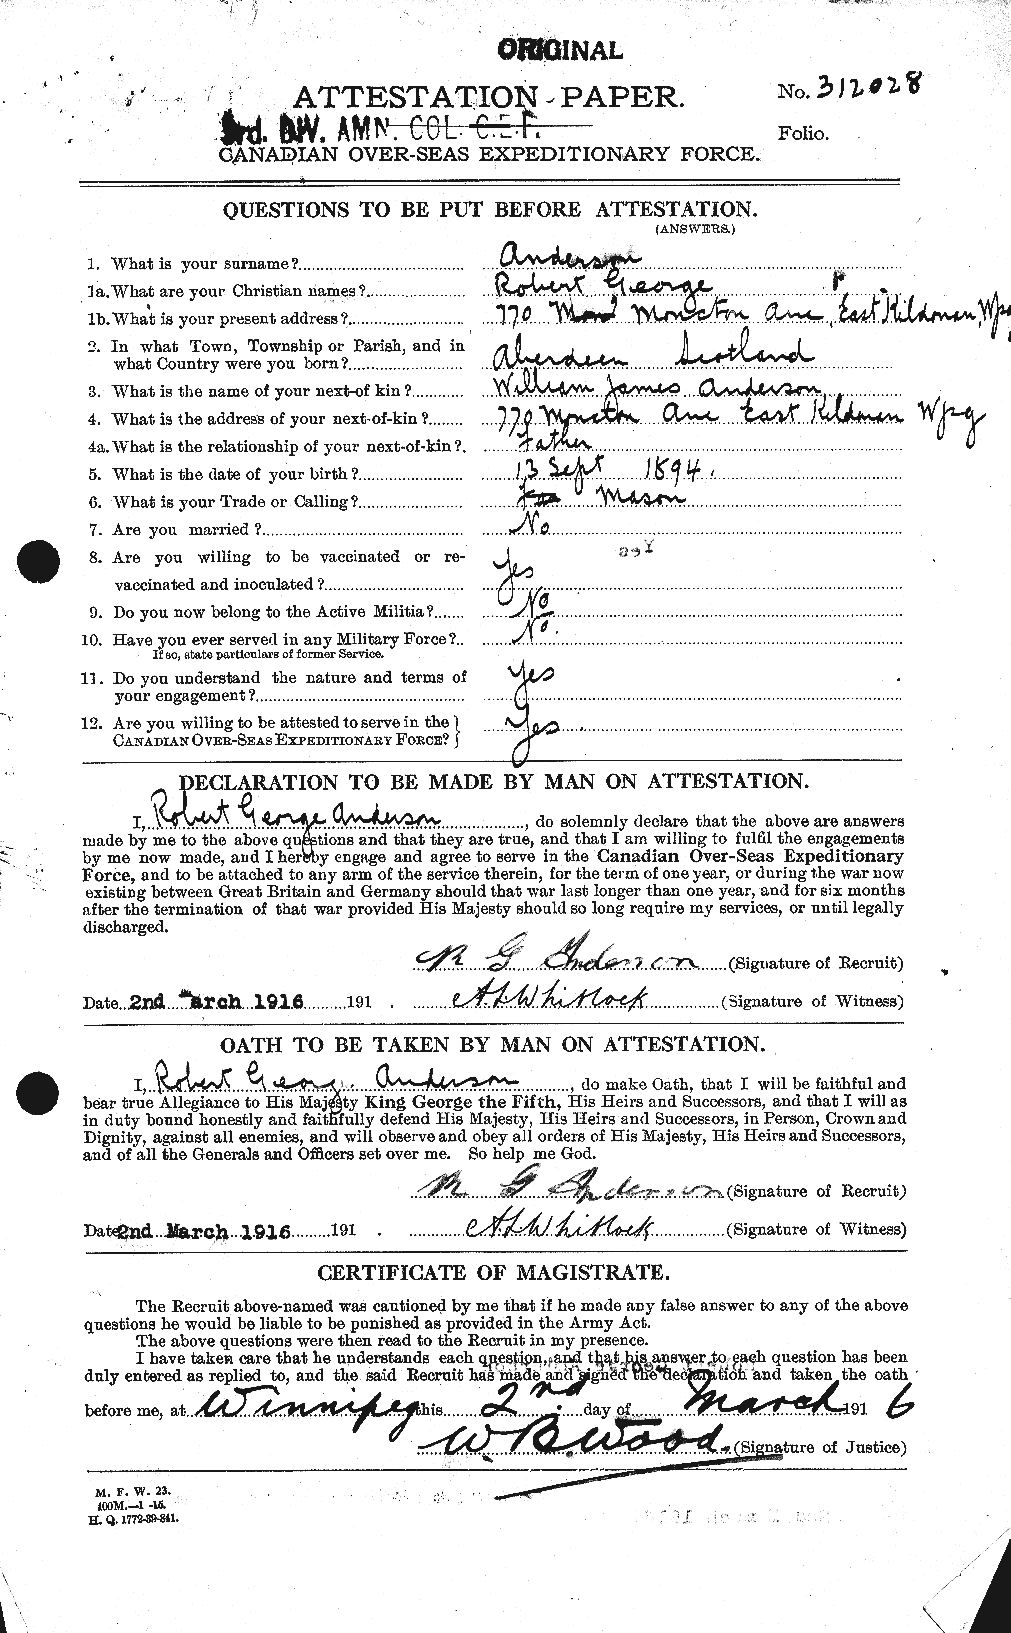 Personnel Records of the First World War - CEF 207256a